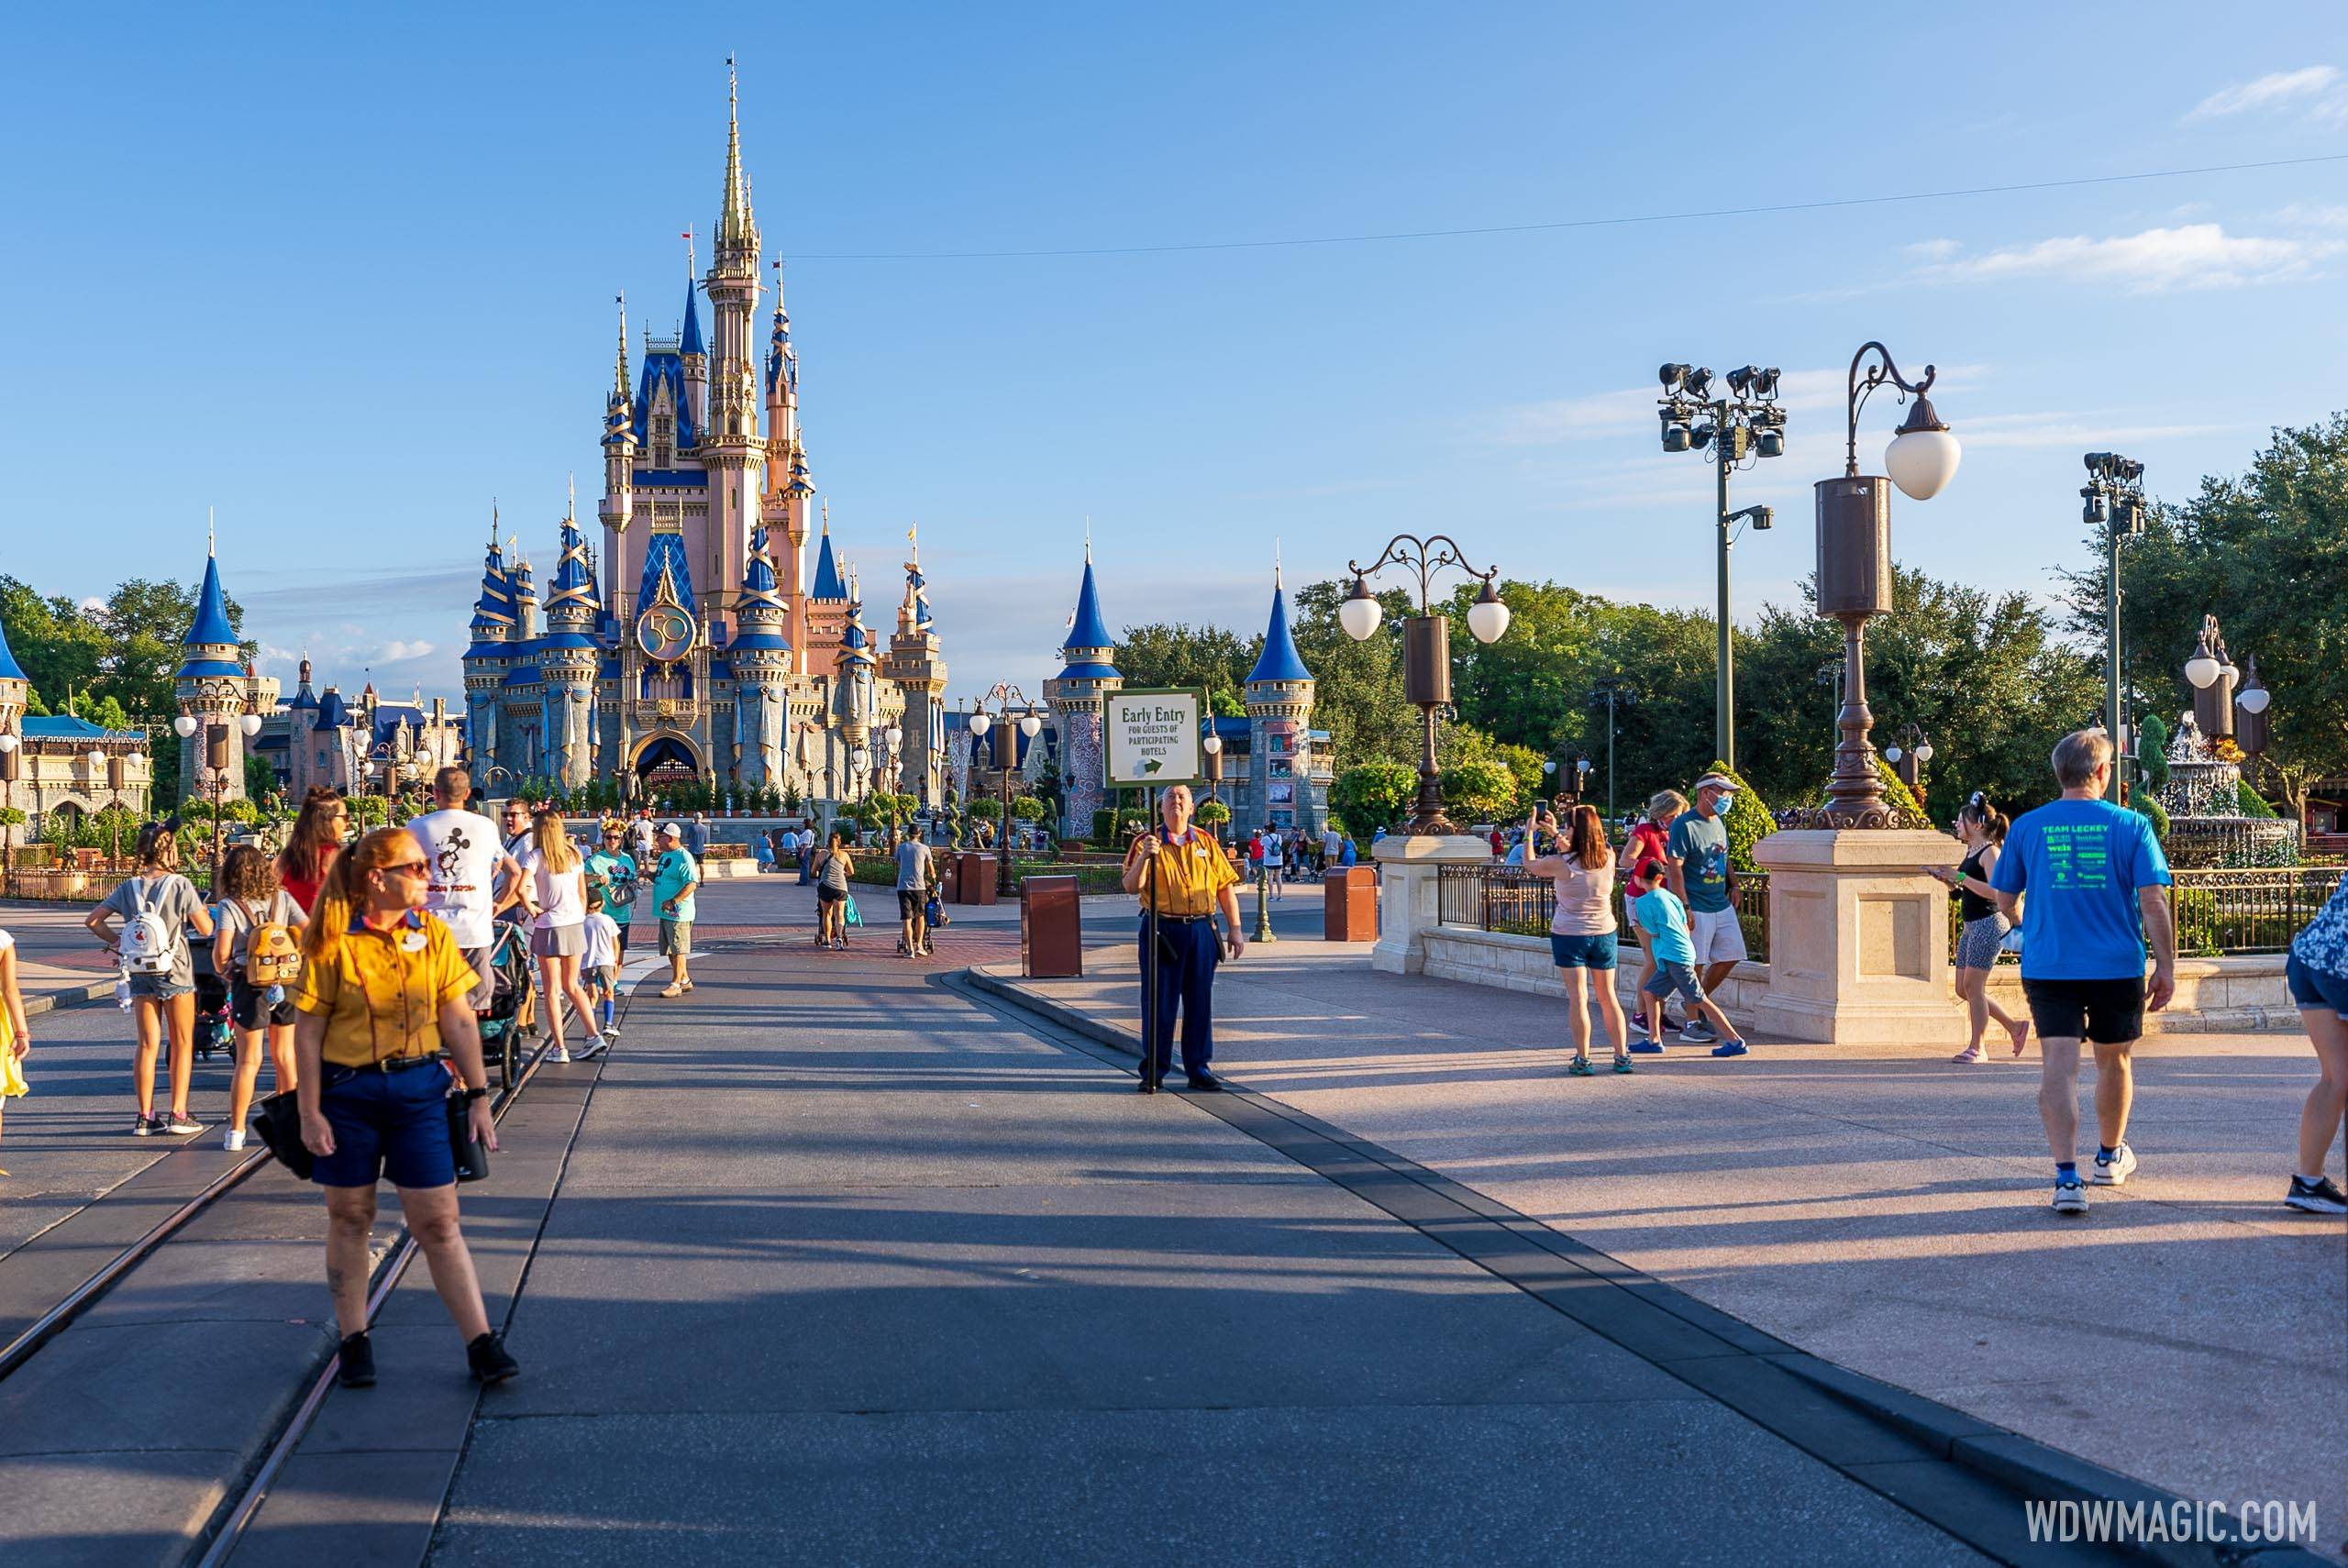 Walt Disney World Resort hotel guests head to the right side of Main Street U.S.A. for Early Entry